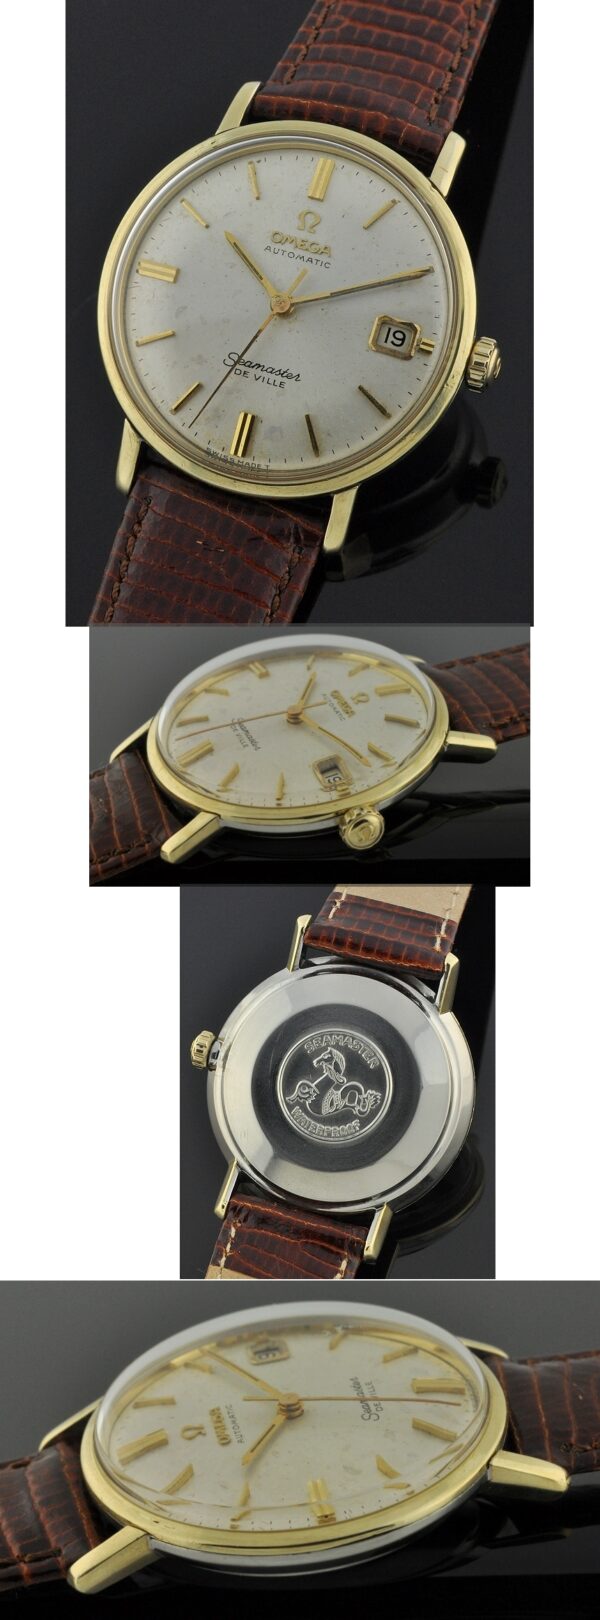 Here is a vintage 1960s 34.5mm Omega Seamaster De Ville automatic watch.